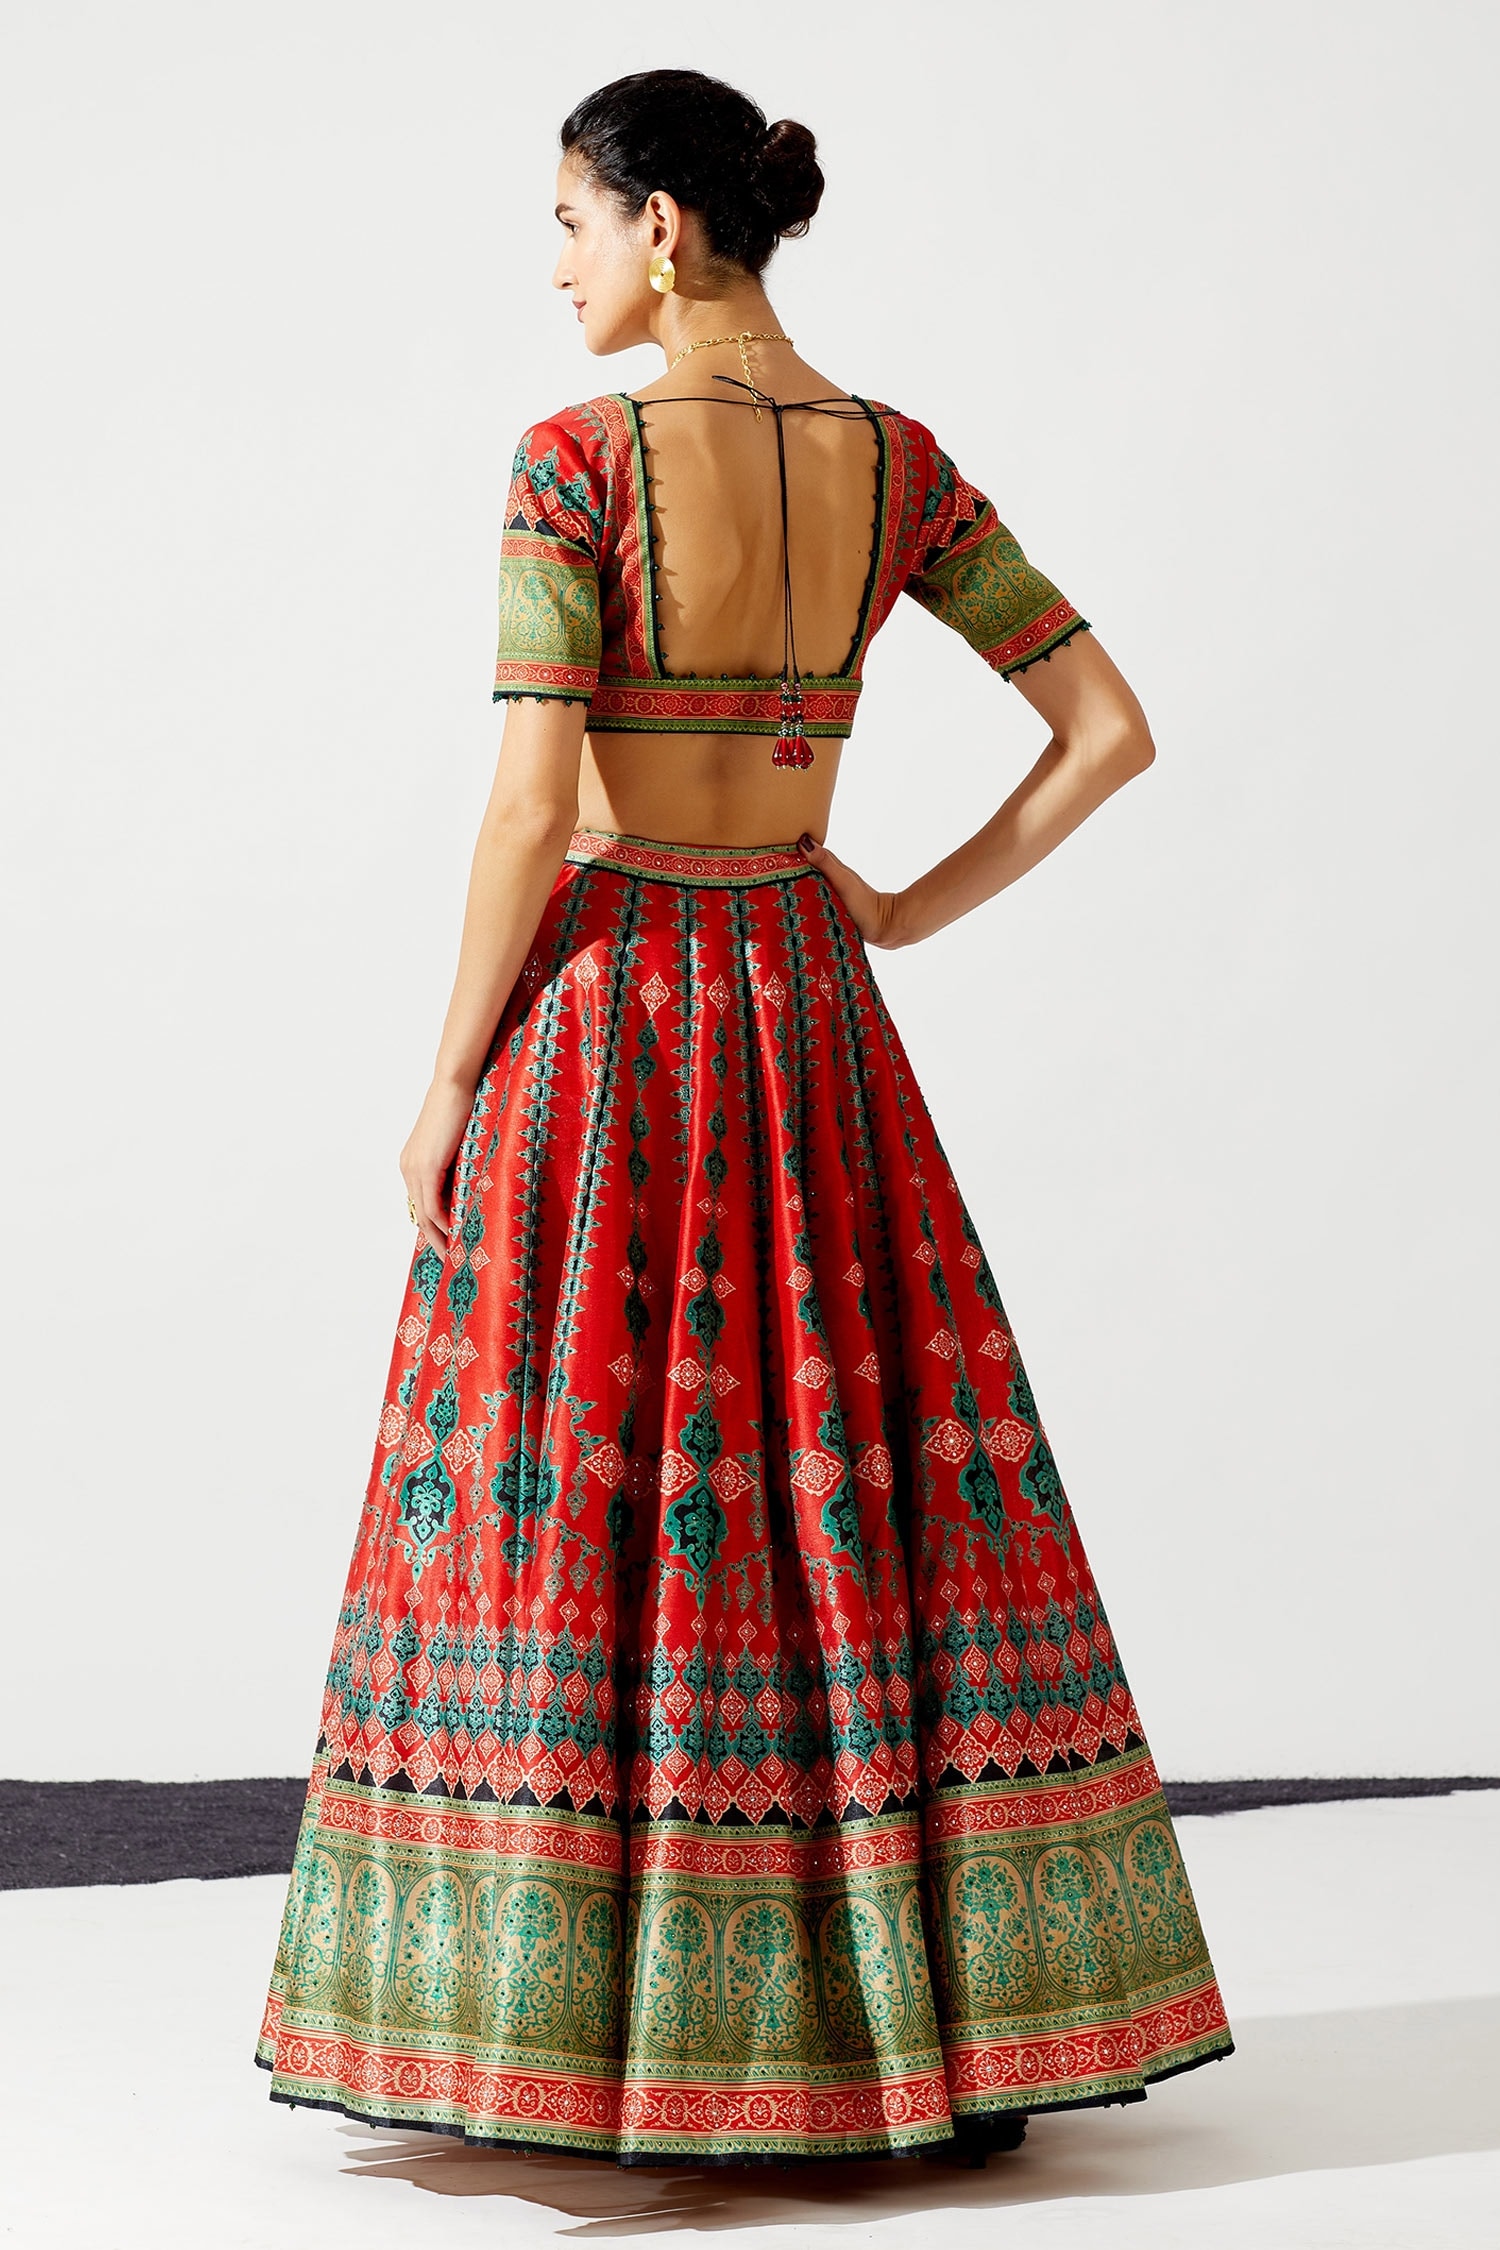 The Contrast Lehengas: Adding More Color to Your Lehenga